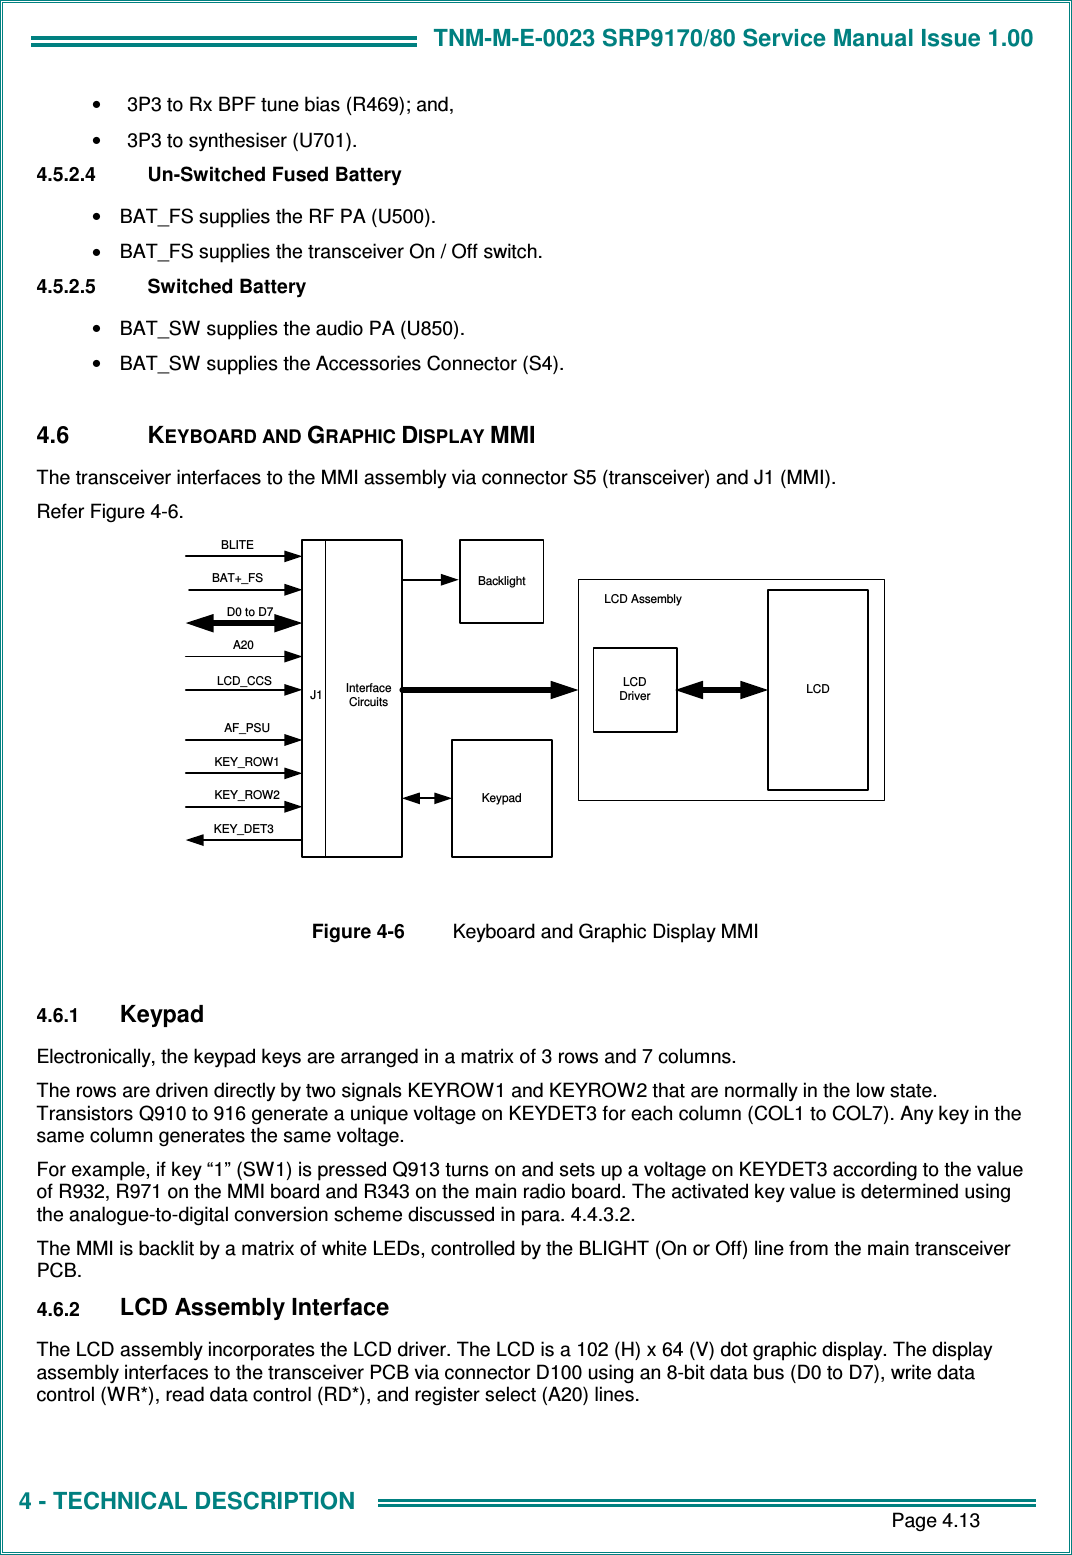 TNM-M-E-0023 SRP9170/80 Service Manual Issue 1.00       Page 4.13 4 - TECHNICAL DESCRIPTION •  3P3 to Rx BPF tune bias (R469); and, •  3P3 to synthesiser (U701). 4.5.2.4  Un-Switched Fused Battery •  BAT_FS supplies the RF PA (U500). •  BAT_FS supplies the transceiver On / Off switch. 4.5.2.5  Switched Battery •  BAT_SW supplies the audio PA (U850). •  BAT_SW supplies the Accessories Connector (S4).  4.6  KEYBOARD AND GRAPHIC DISPLAY MMI The transceiver interfaces to the MMI assembly via connector S5 (transceiver) and J1 (MMI). Refer Figure 4-6. LCDDriverInterfaceCircuitsLCD AssemblyLCDKeypadBacklightJ1D0 to D7KEY_DET3LCD_CCSKEY_ROW1A20KEY_ROW2BLITEAF_PSUBAT+_FS  Figure 4-6  Keyboard and Graphic Display MMI  4.6.1 Keypad Electronically, the keypad keys are arranged in a matrix of 3 rows and 7 columns. The rows are driven directly by two signals KEYROW1 and KEYROW2 that are normally in the low state. Transistors Q910 to 916 generate a unique voltage on KEYDET3 for each column (COL1 to COL7). Any key in the same column generates the same voltage. For example, if key “1” (SW1) is pressed Q913 turns on and sets up a voltage on KEYDET3 according to the value of R932, R971 on the MMI board and R343 on the main radio board. The activated key value is determined using the analogue-to-digital conversion scheme discussed in para. 4.4.3.2. The MMI is backlit by a matrix of white LEDs, controlled by the BLIGHT (On or Off) line from the main transceiver PCB. 4.6.2 LCD Assembly Interface The LCD assembly incorporates the LCD driver. The LCD is a 102 (H) x 64 (V) dot graphic display. The display assembly interfaces to the transceiver PCB via connector D100 using an 8-bit data bus (D0 to D7), write data control (WR*), read data control (RD*), and register select (A20) lines.  